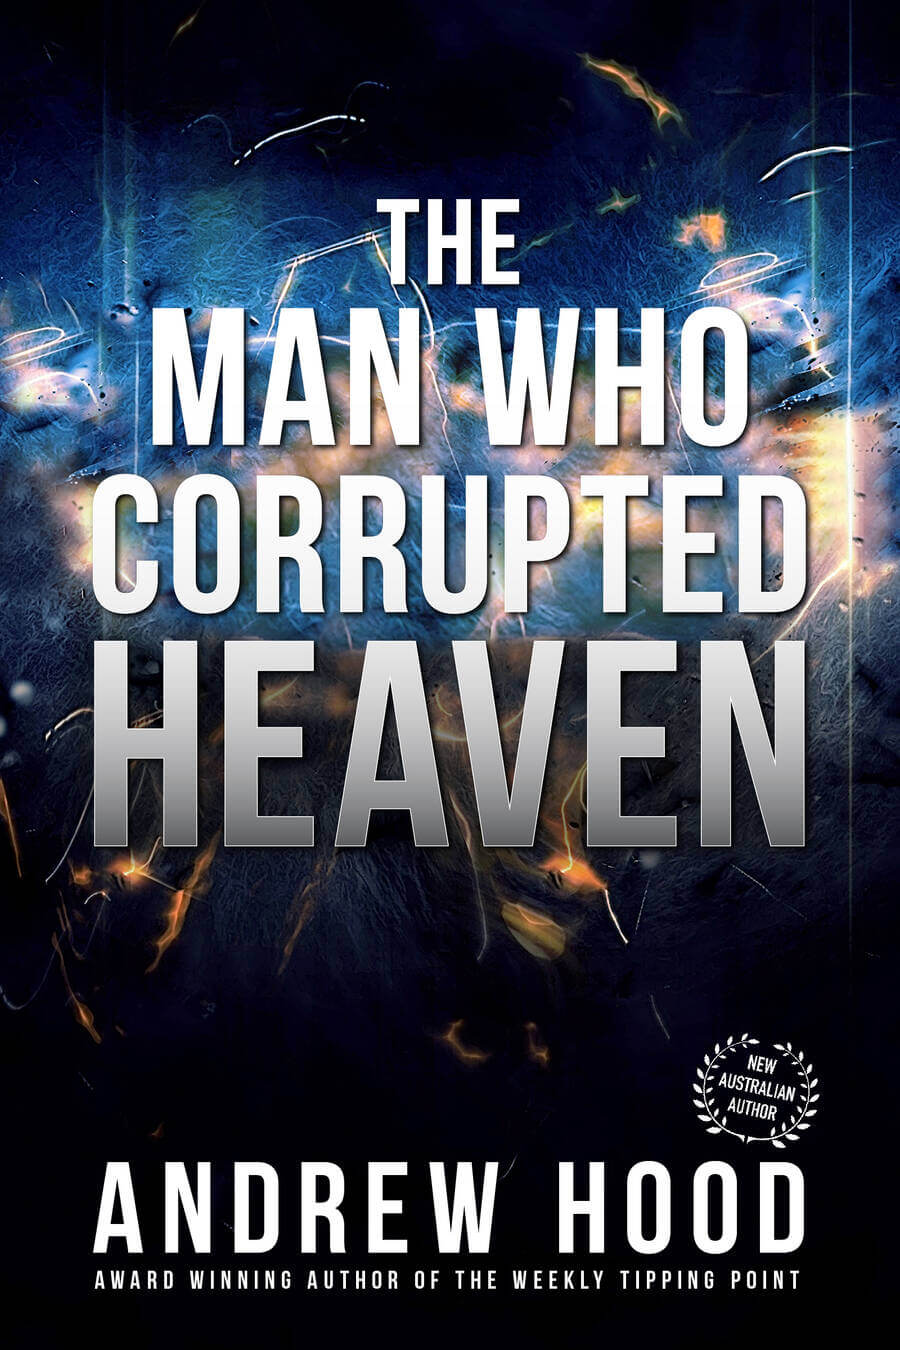 The Man Who Corrupted Heaven